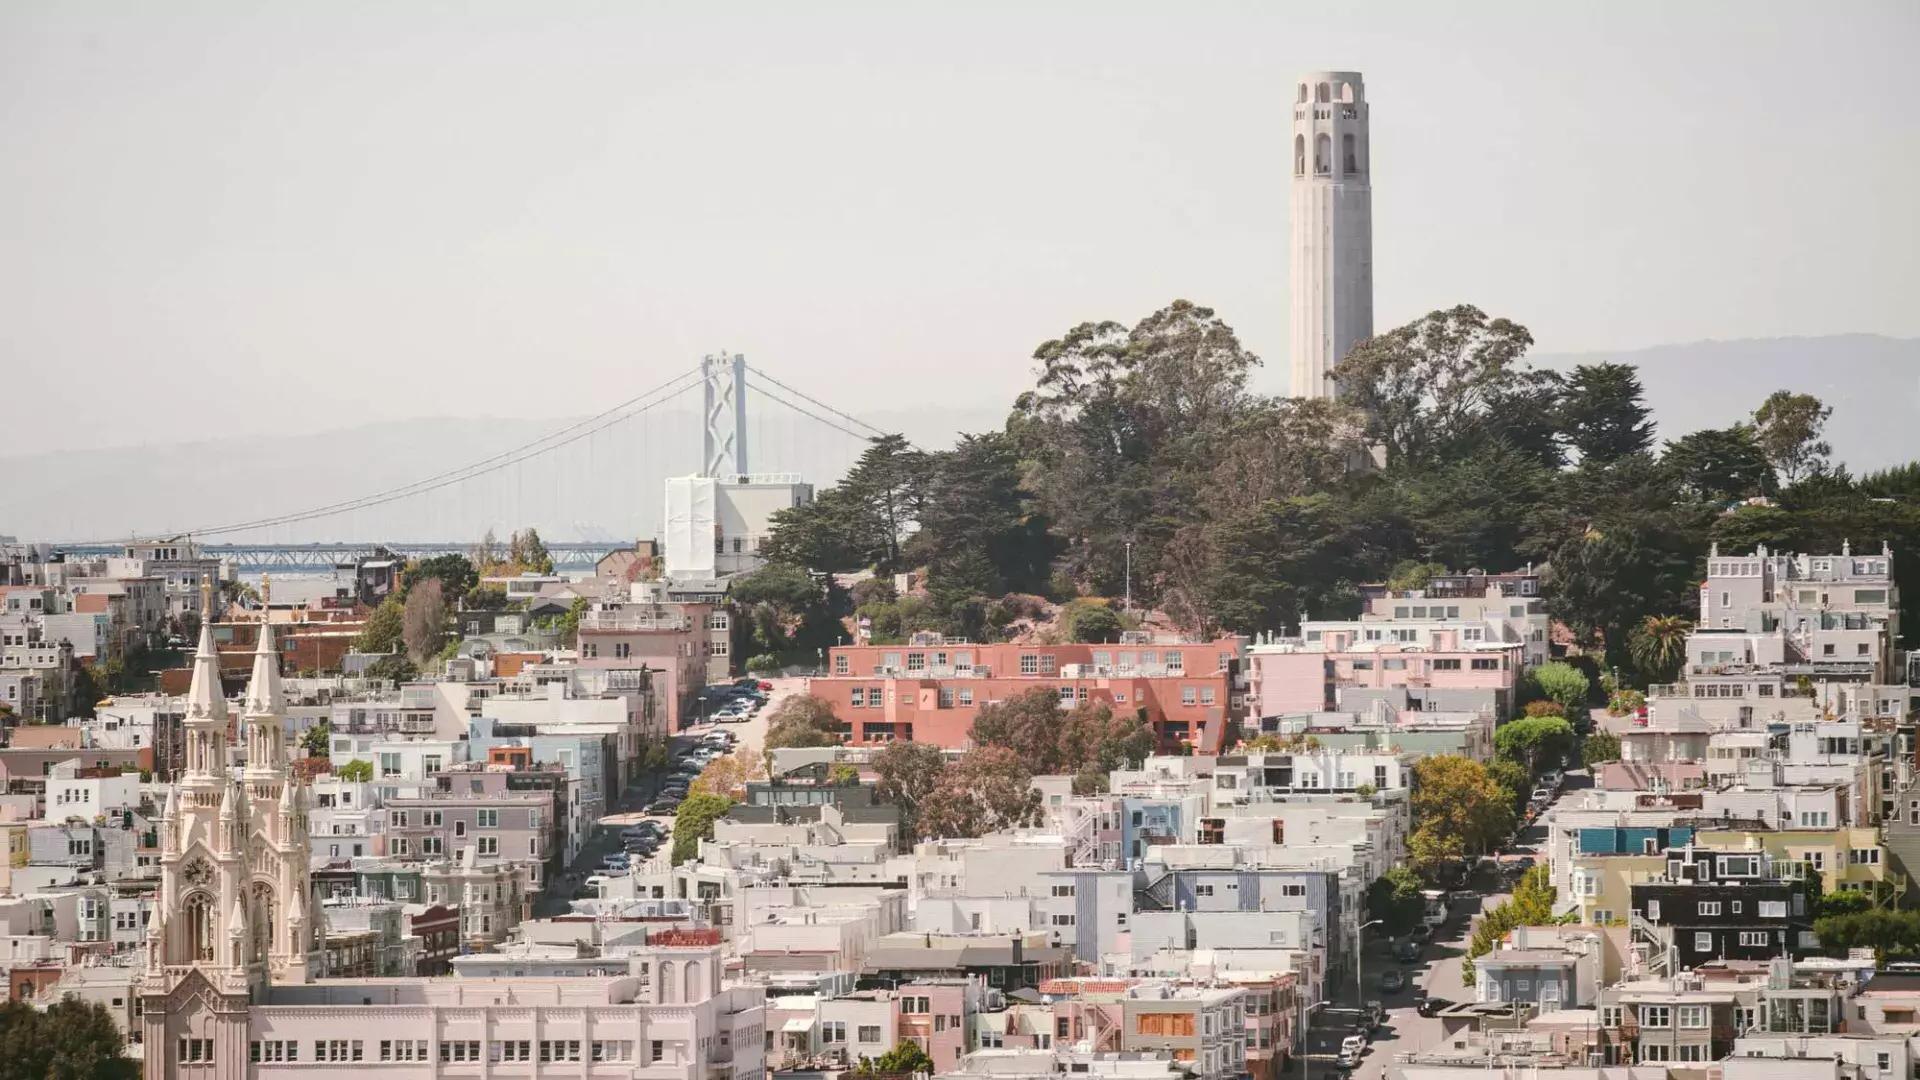 San Francisco's Coit Tower is pictured with the Bay Bridge in the background and a hill covered in houses in the foreground.